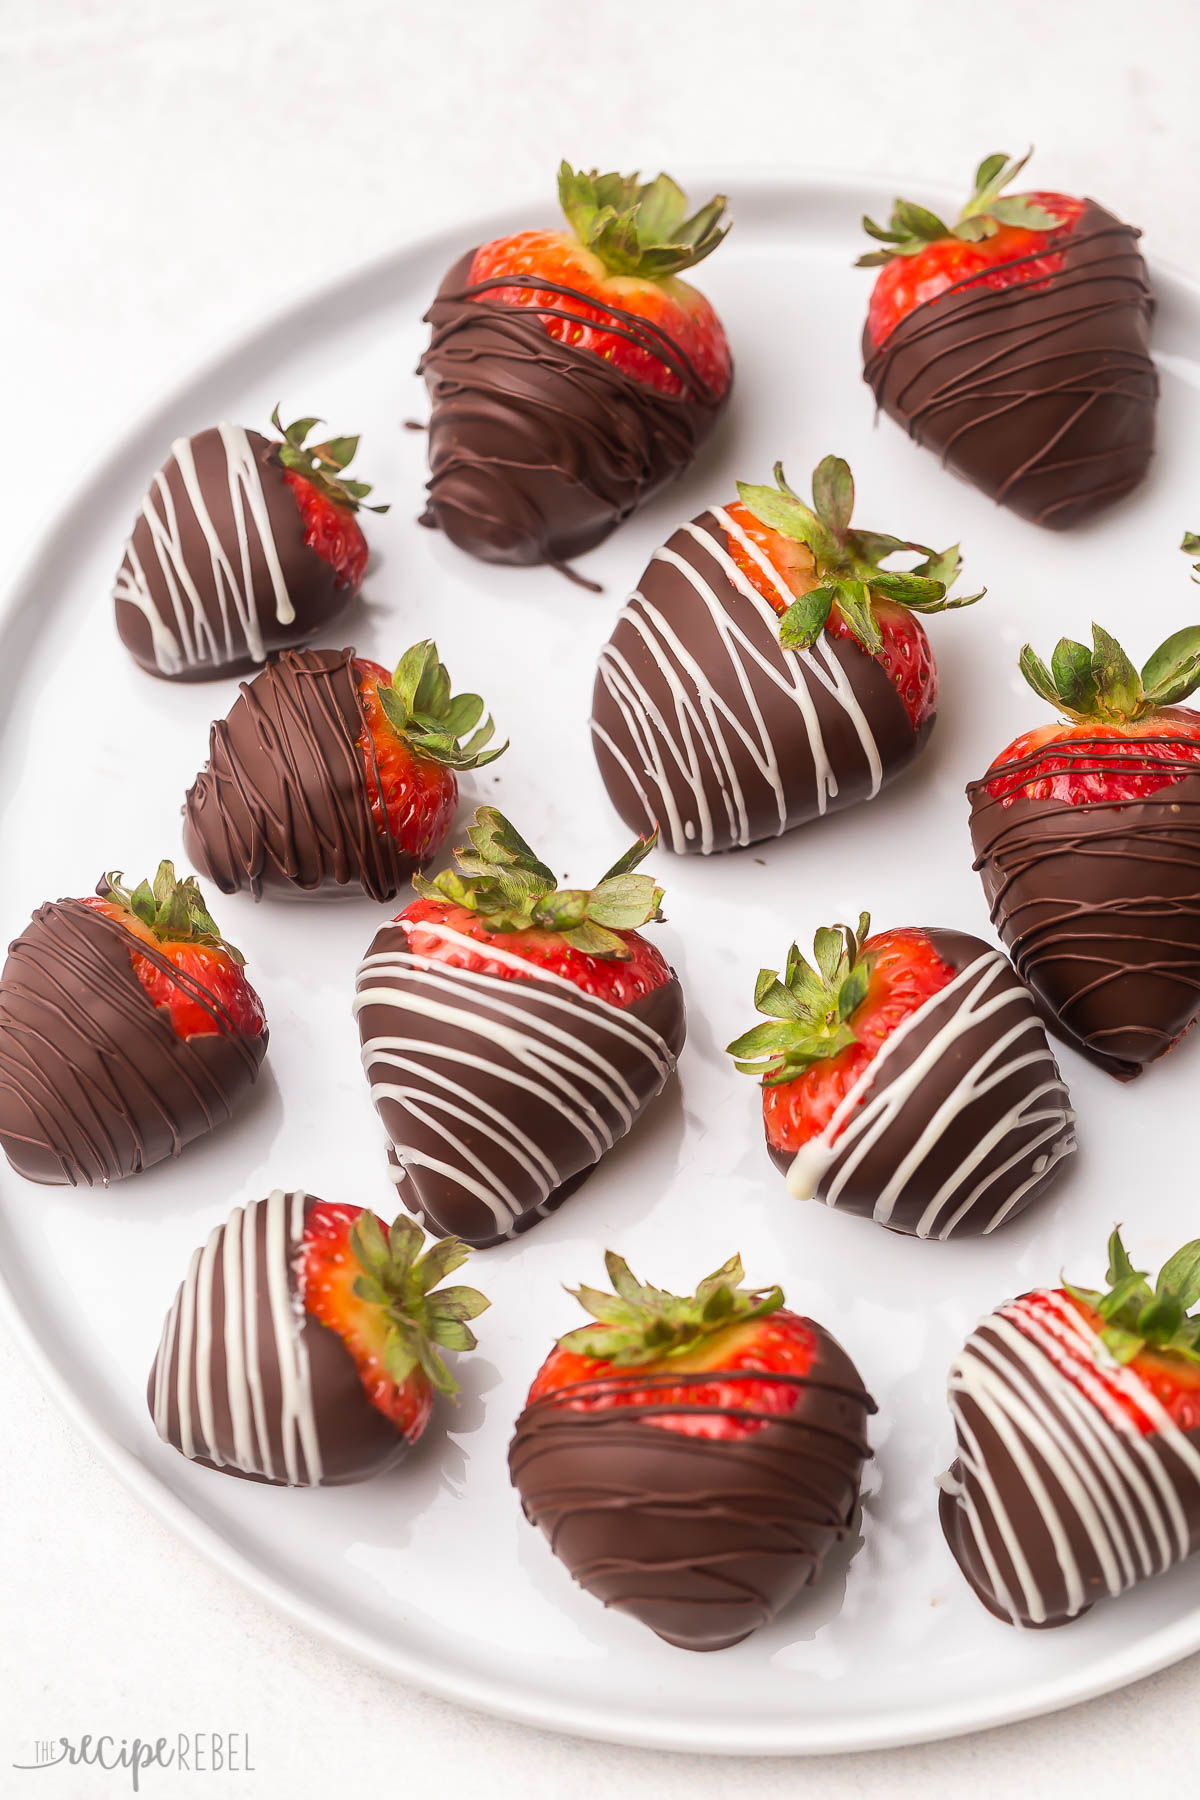 Top view of a plate full of chocolate covered strawberries.